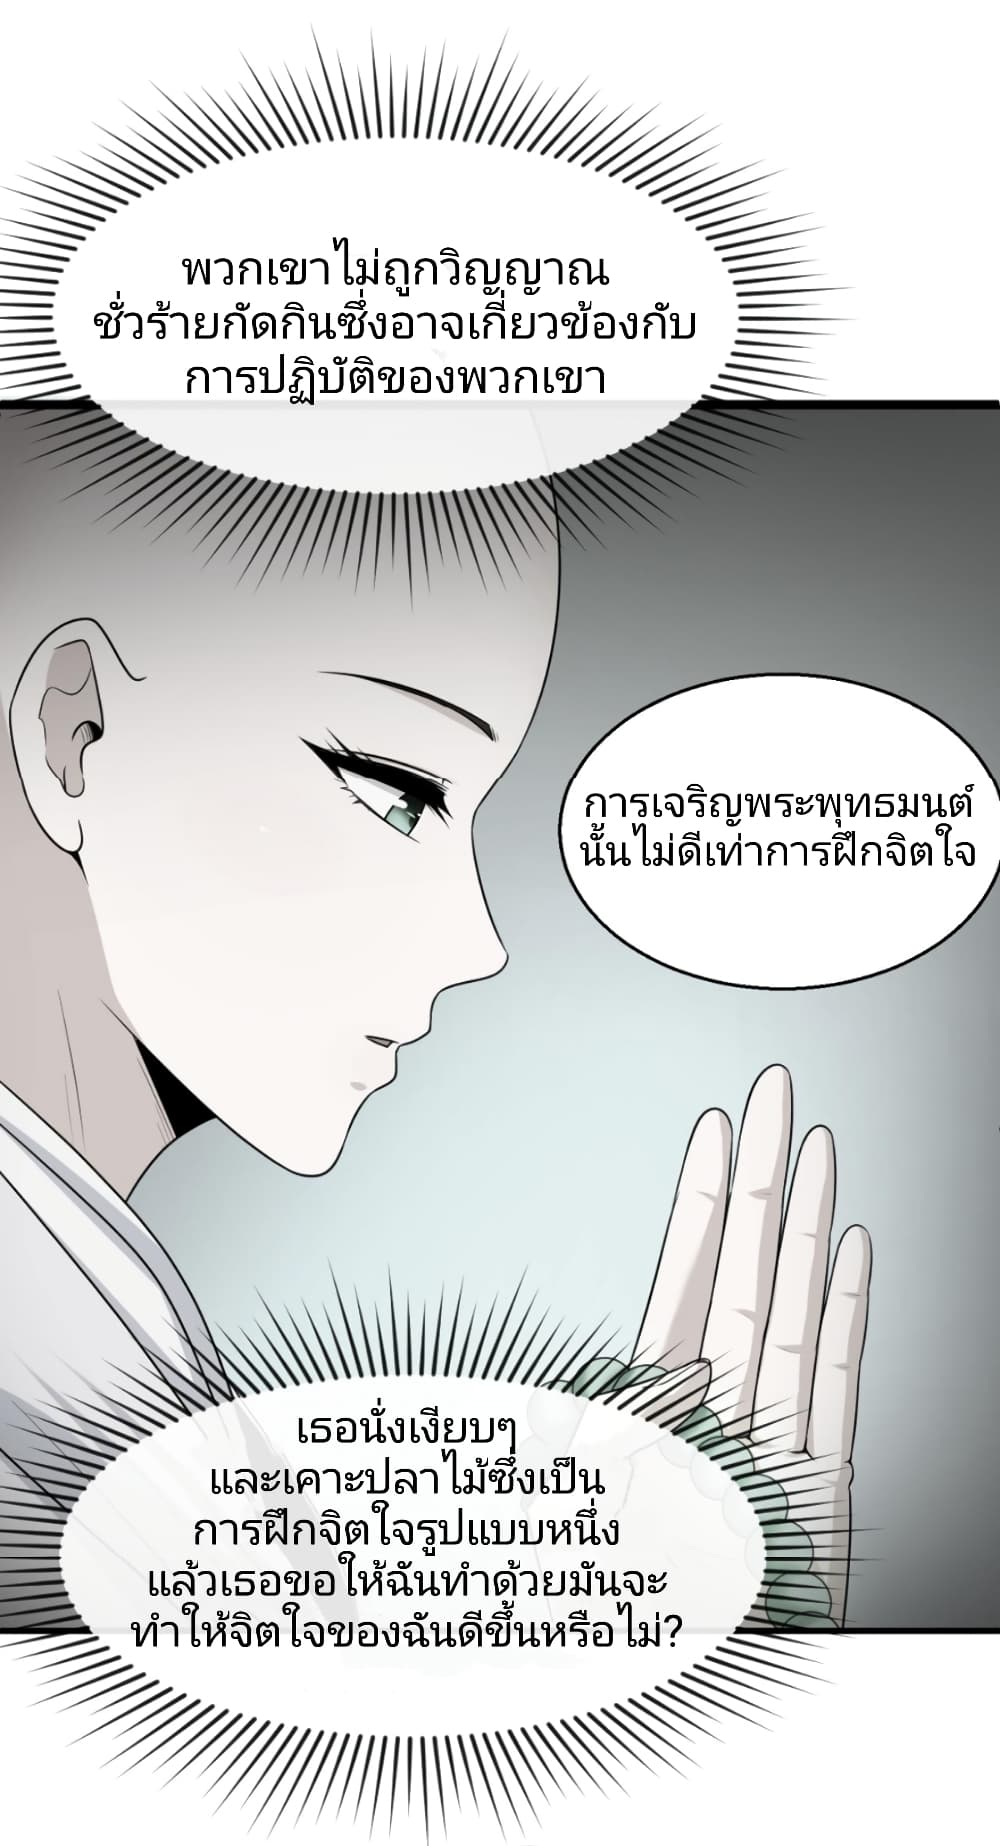 The Age of Ghost Spirits à¸à¸­à¸à¸à¸µà¹ 45 (20)